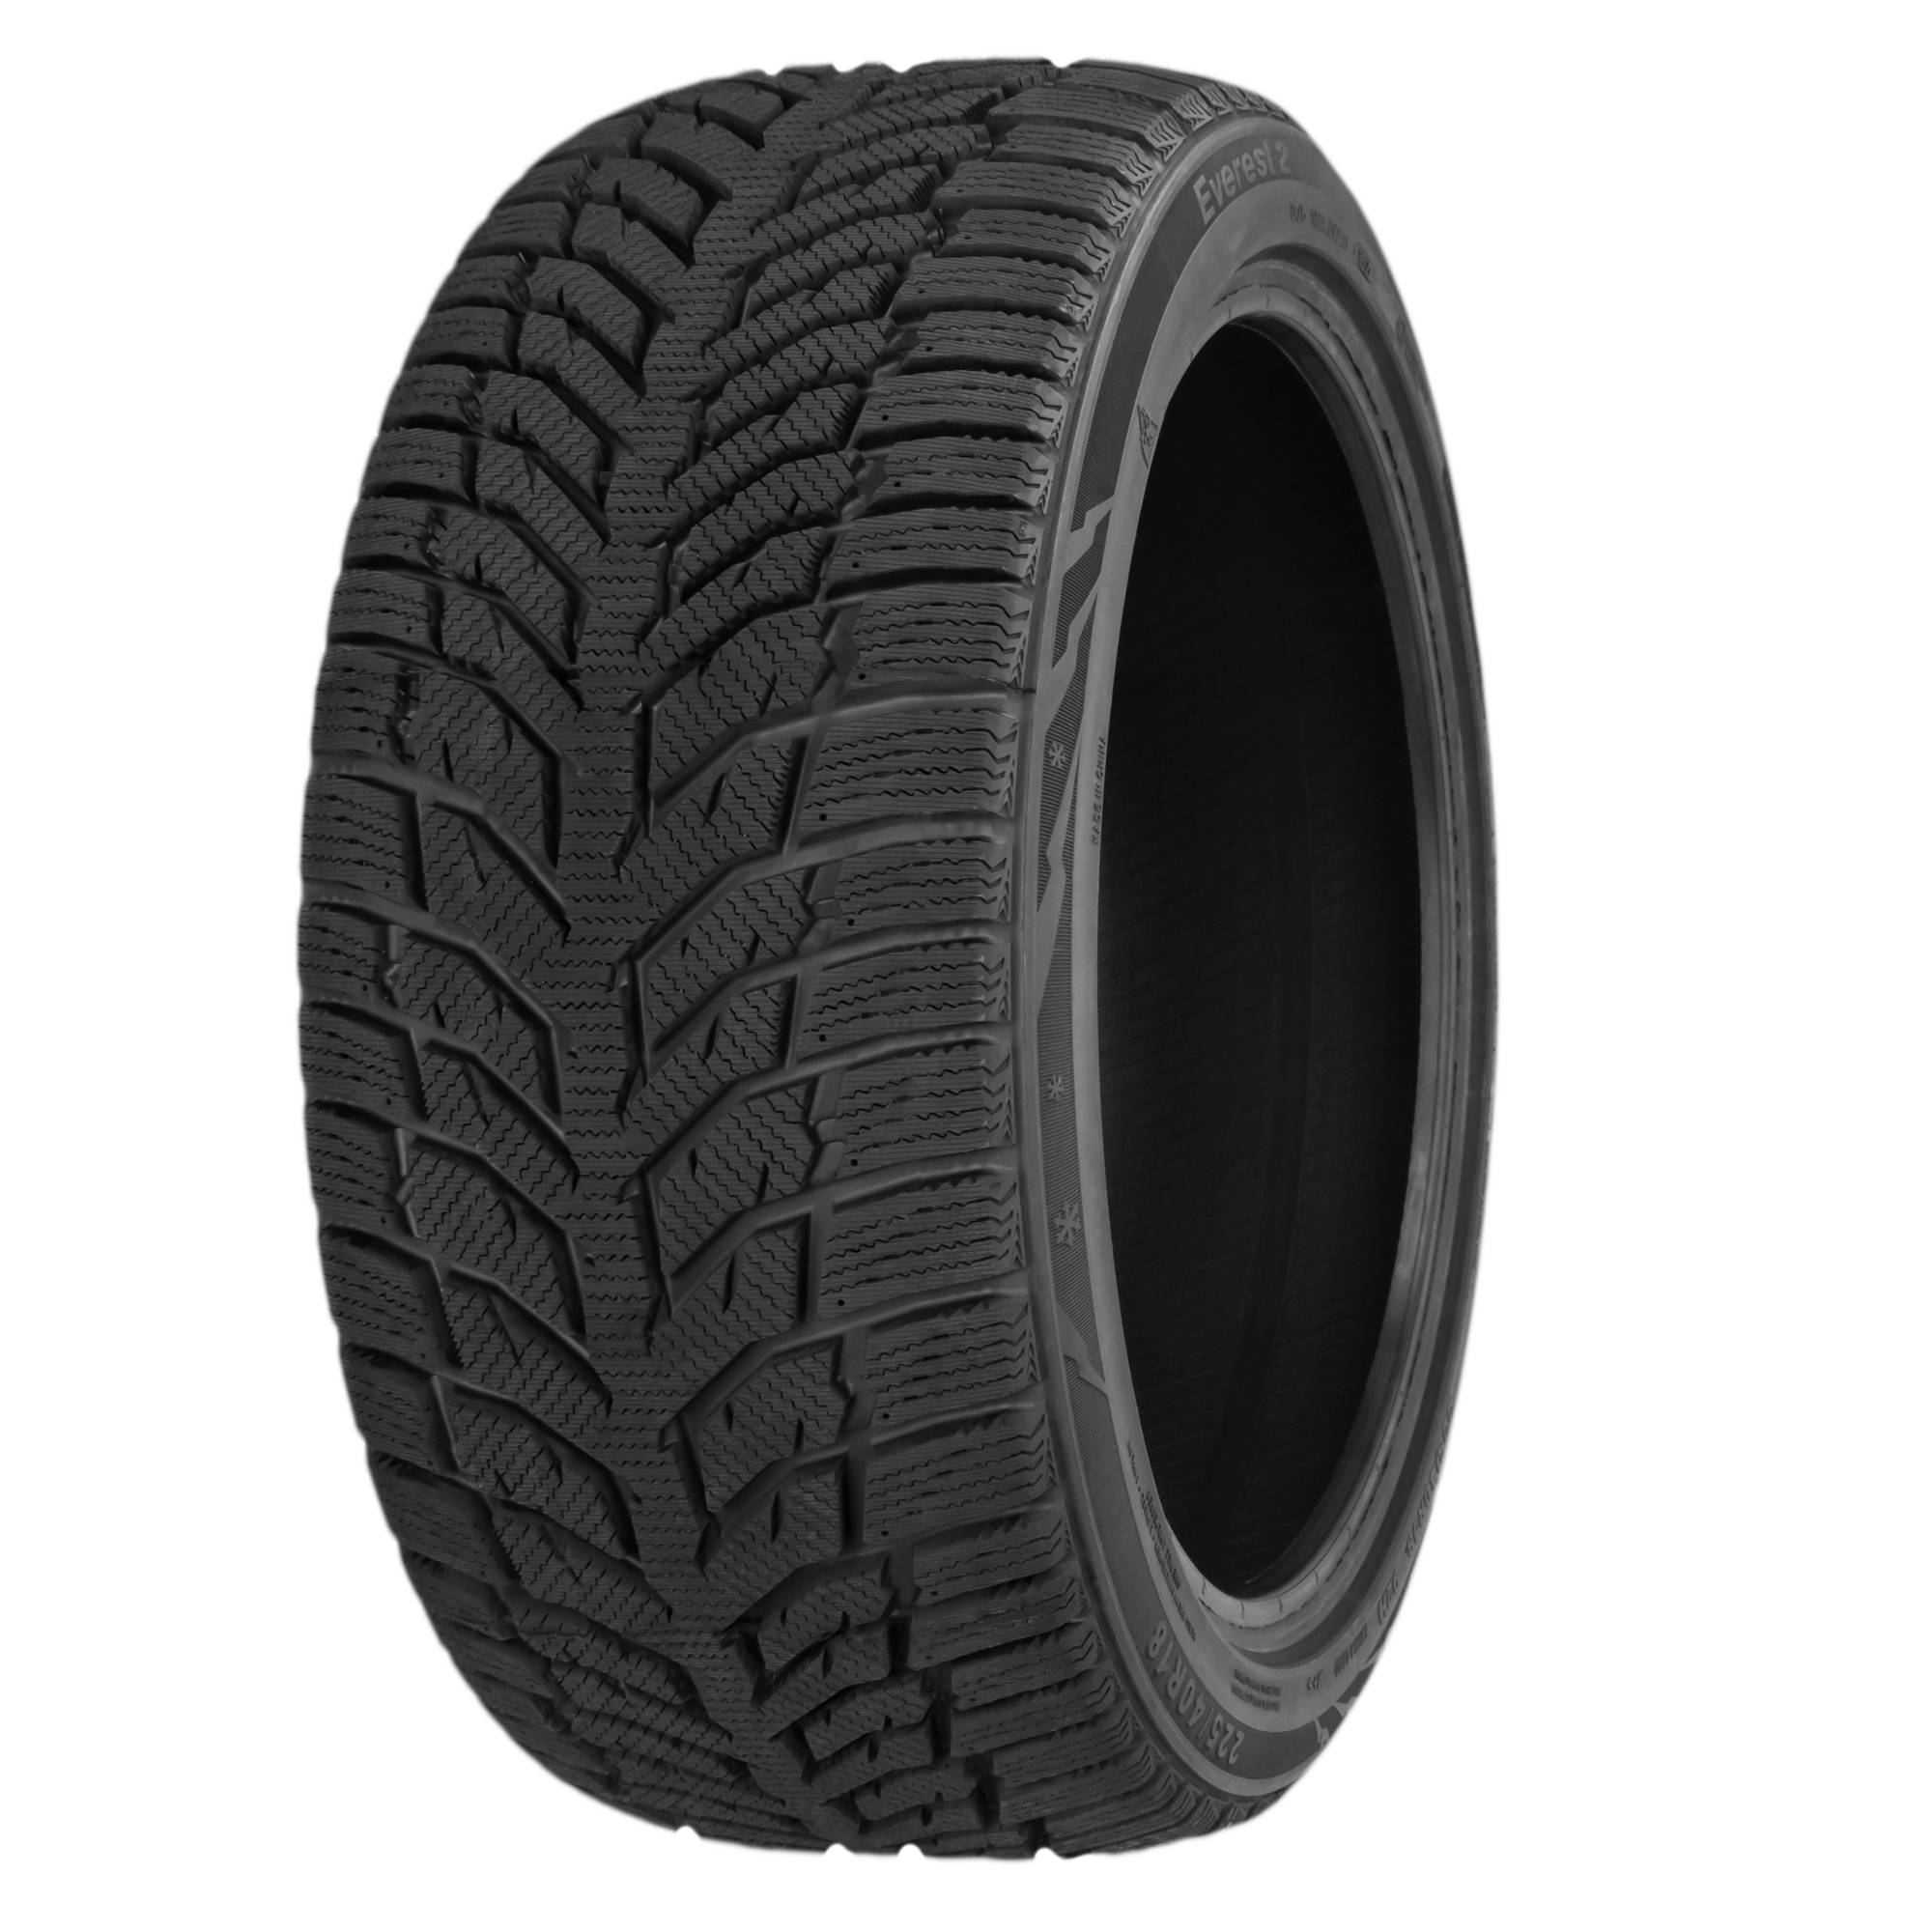 EAN 4250084605486, SYRON EVEREST 2 M+S 3PMSF, 155/65 R14 75 T